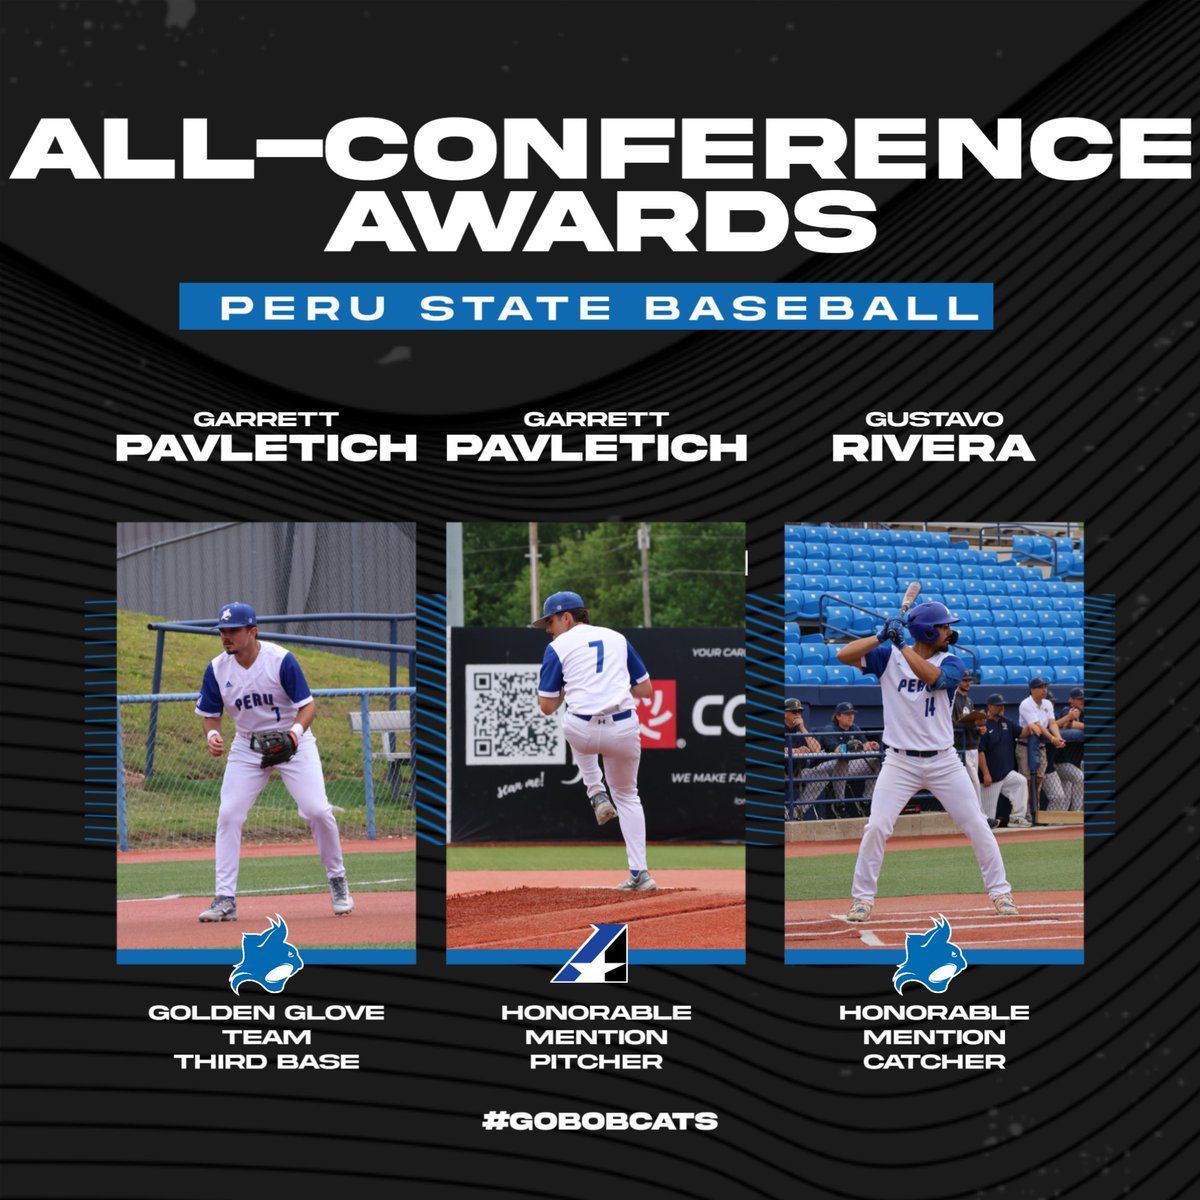 Congratulations to Garrett and Gustavo on earning Baseball All-Conference Awards! #ClawsOut | #PeruState156